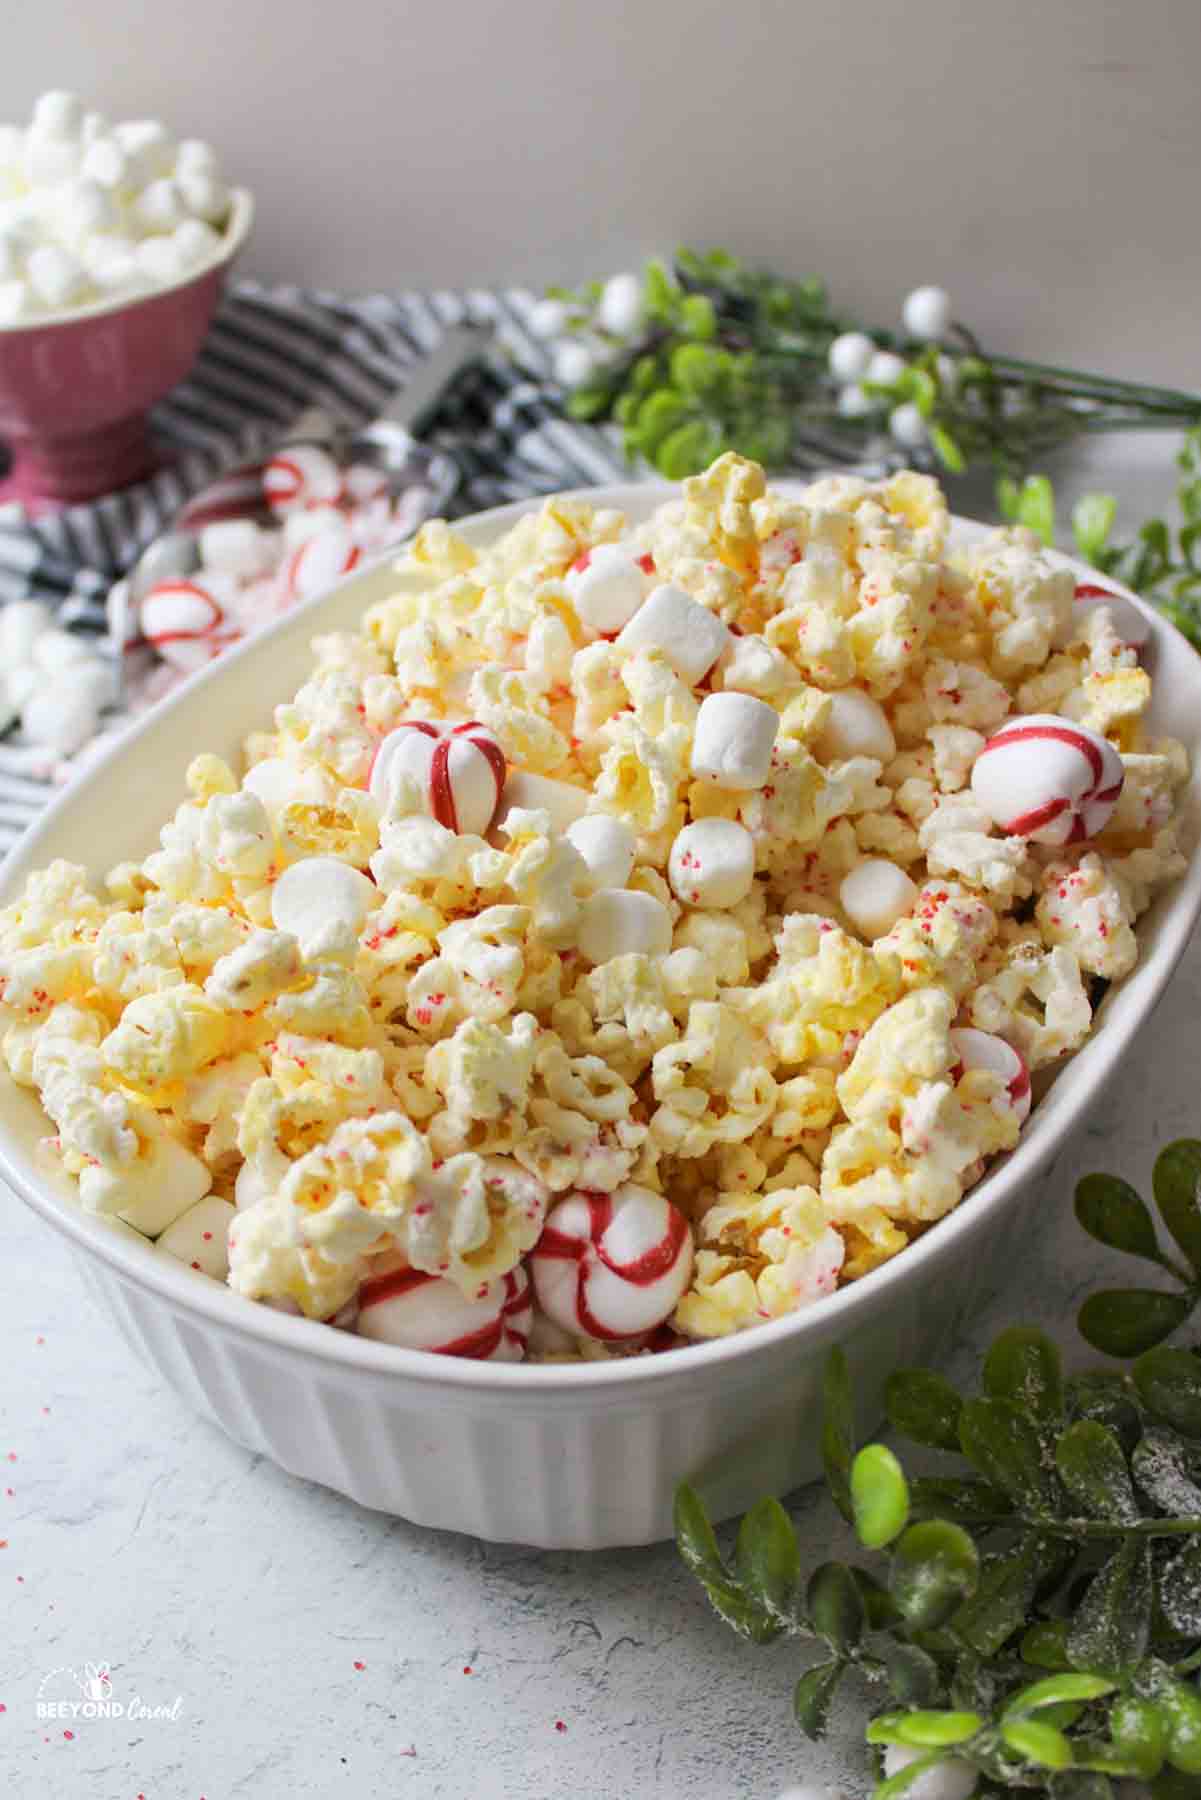 a side view of a white oval dish filled with white chocolate peppermint popcorn, mini marshmallows, and peppermint balls